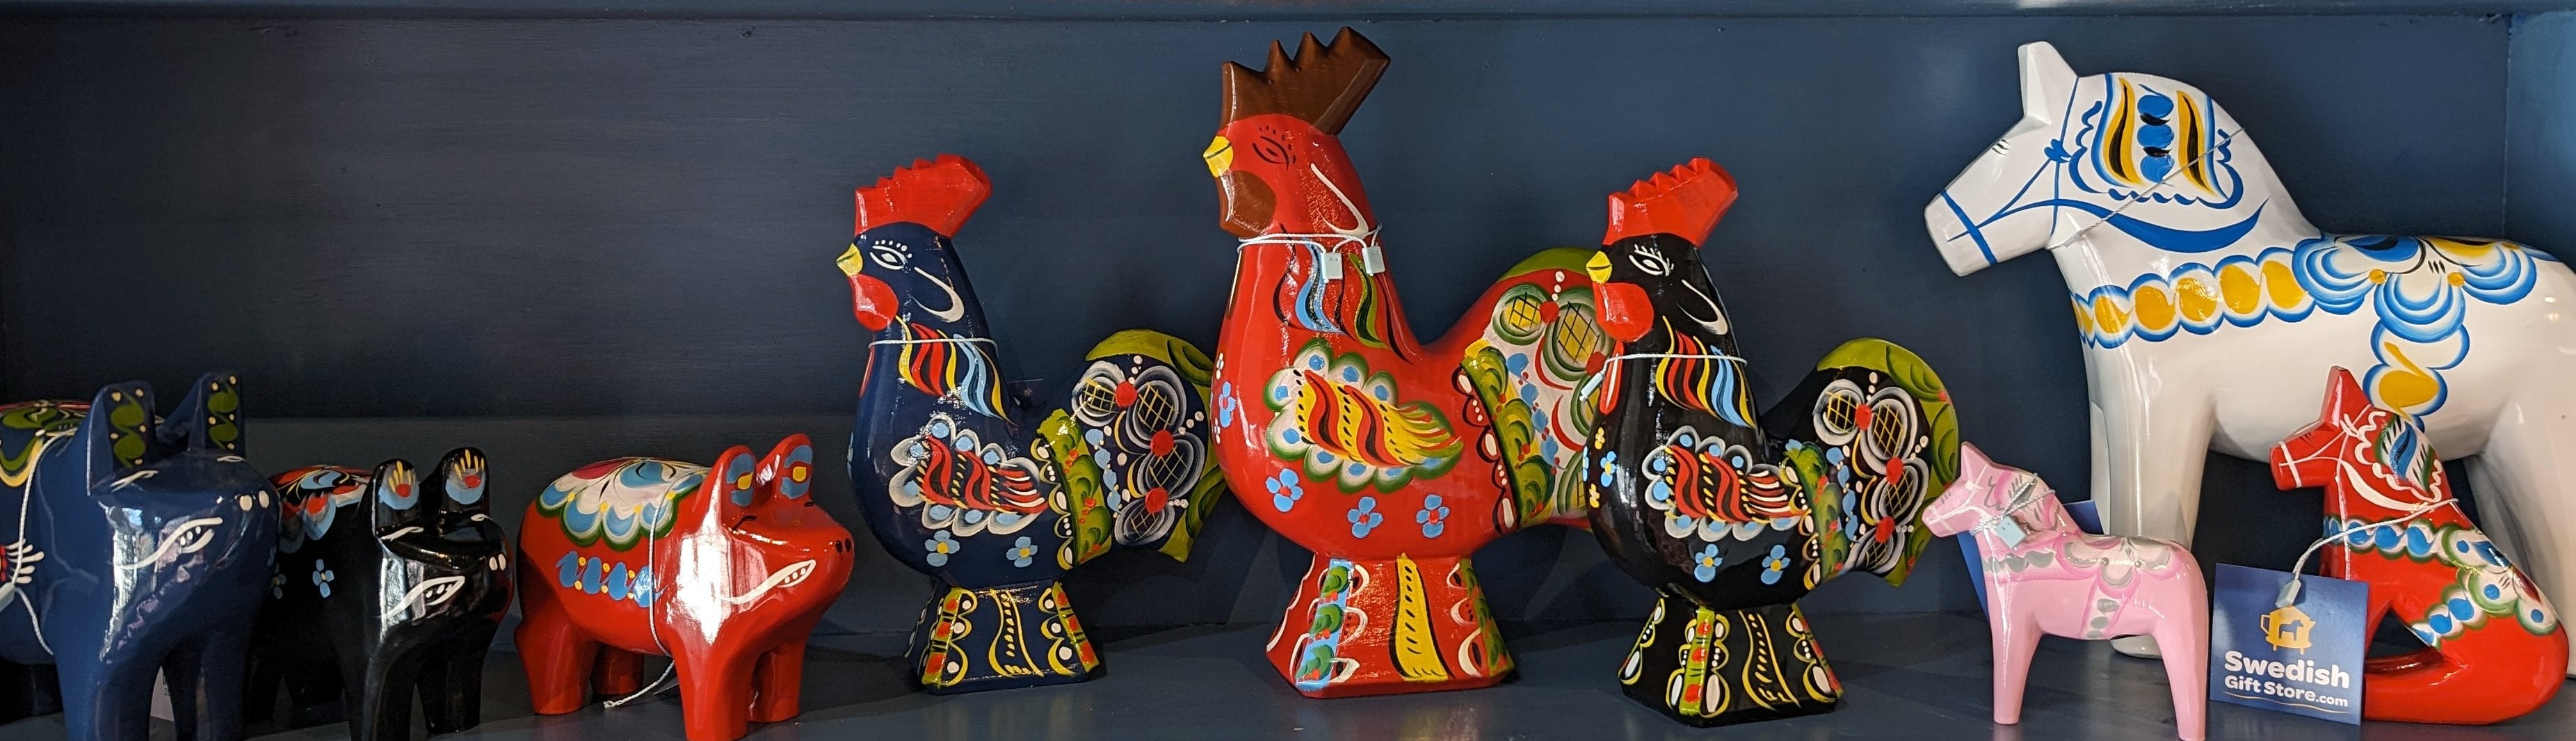 Decor: Figurines - Dala Horses, Pigs & Roosters